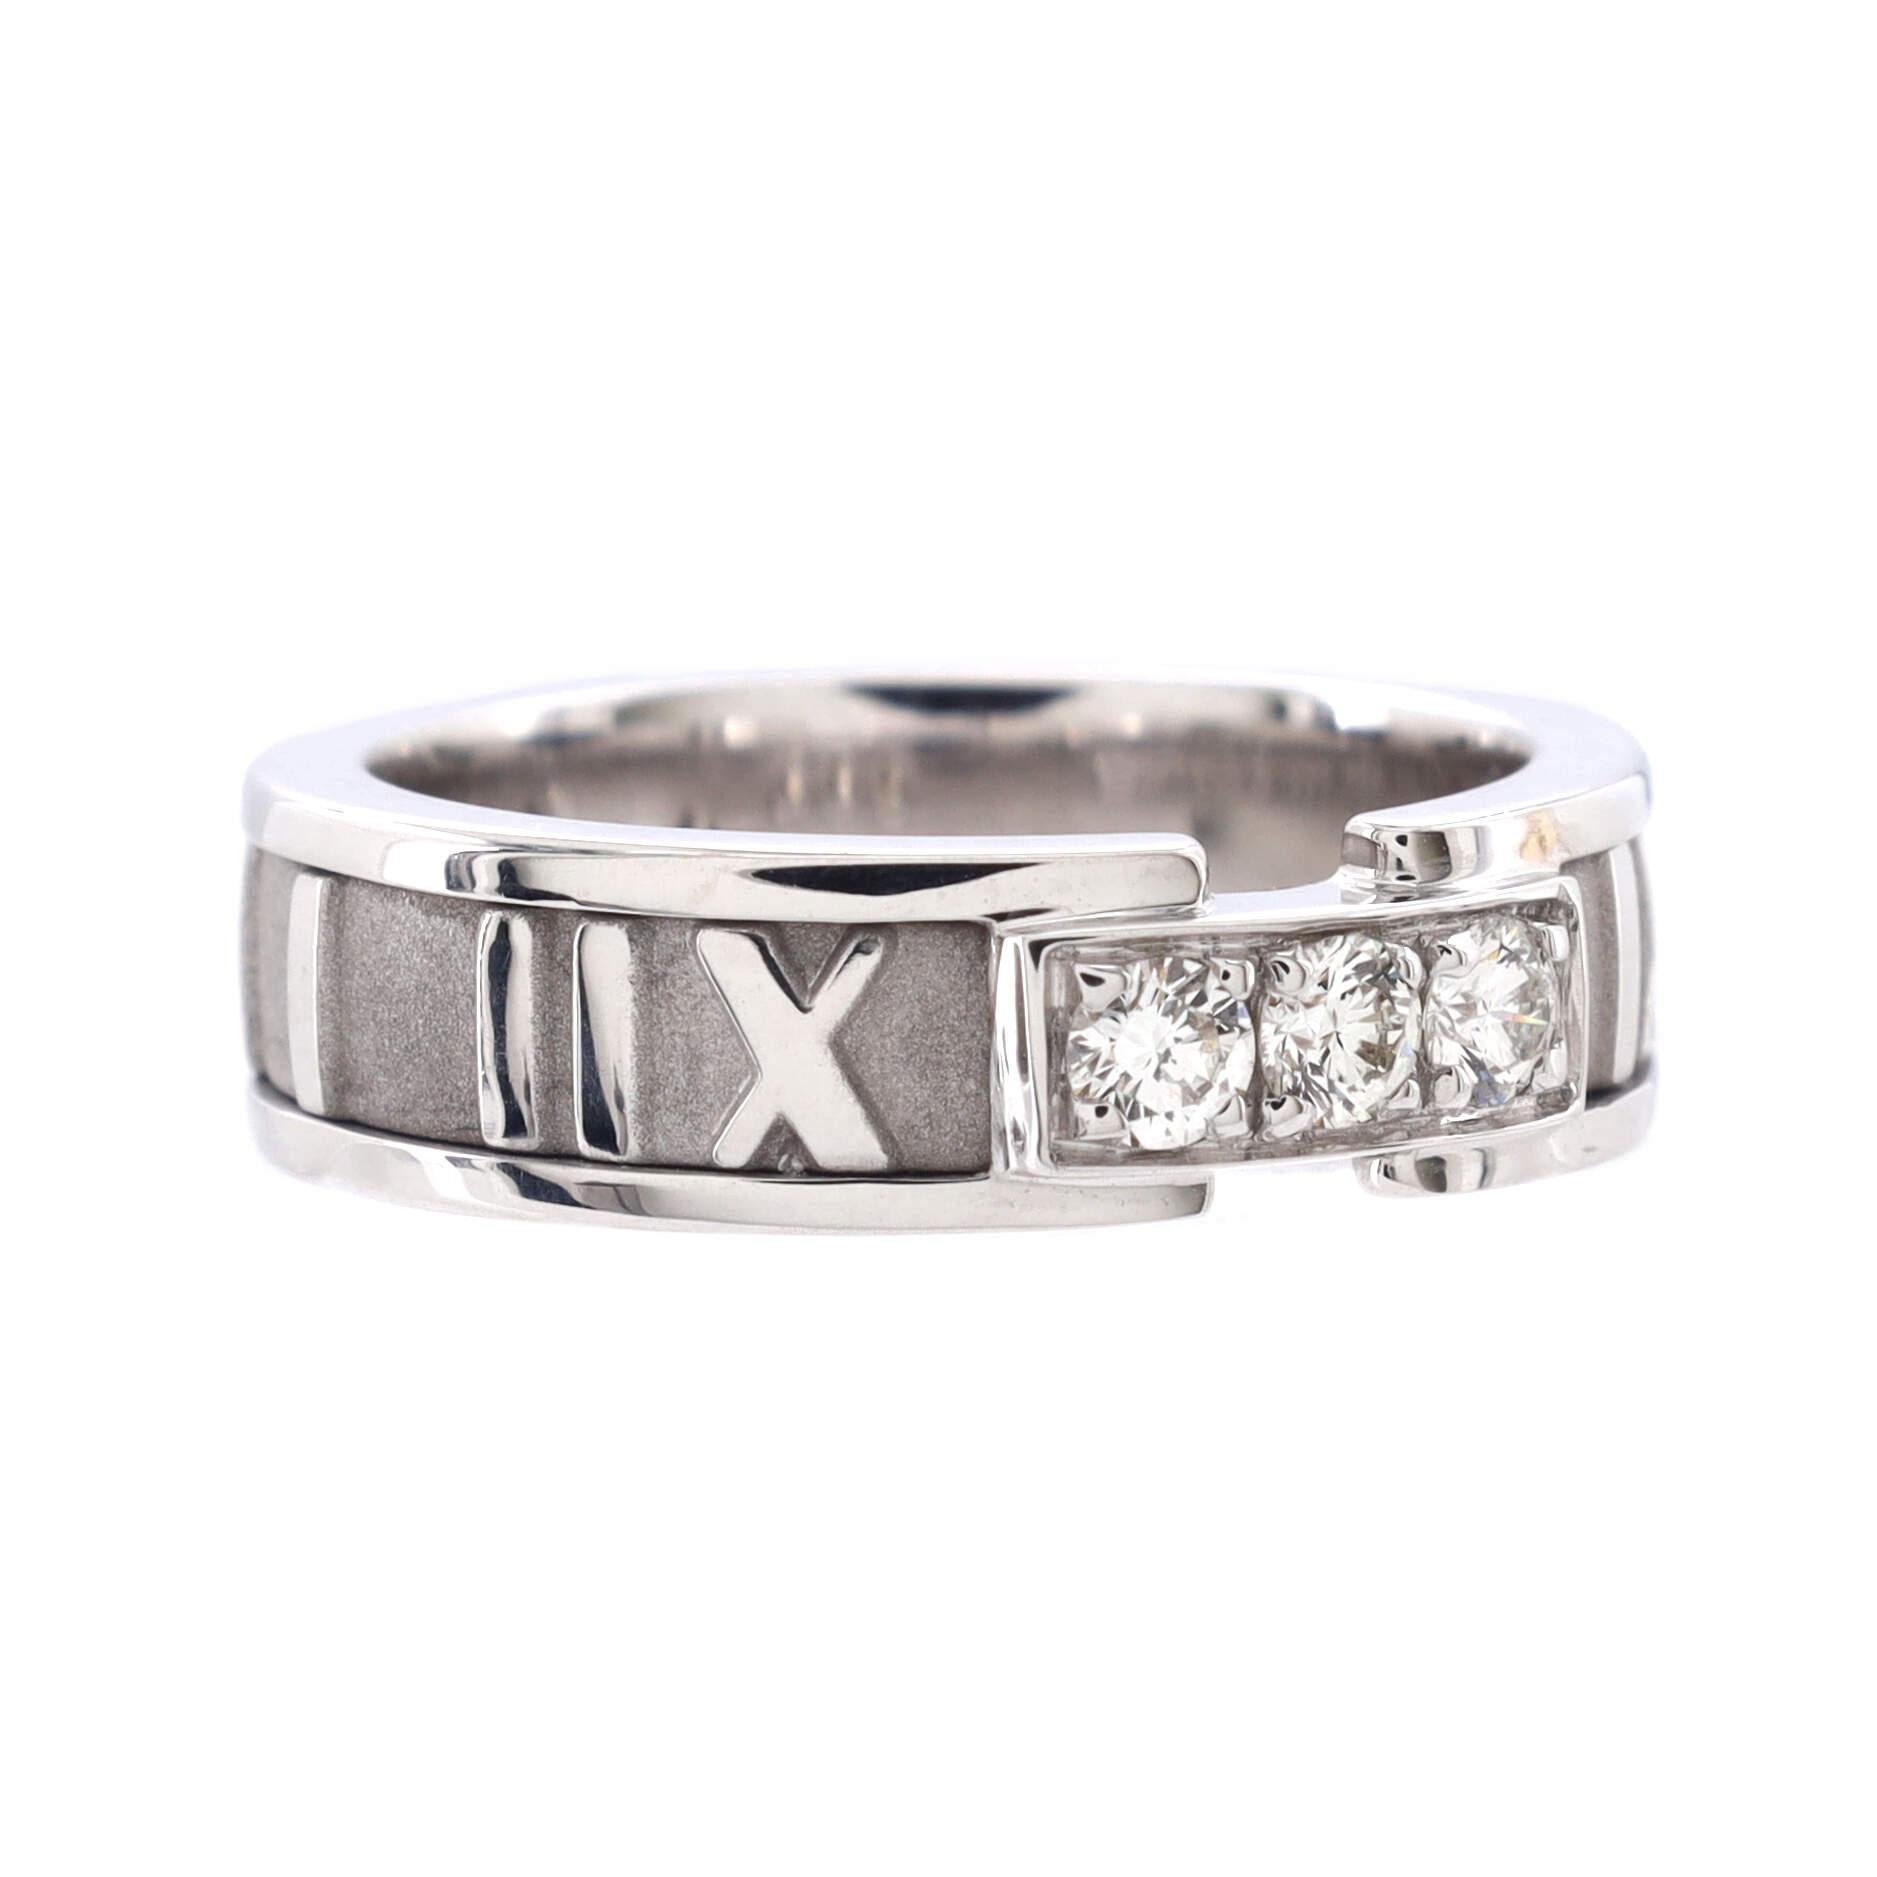 Condition: Very good. Moderate wear and re-polishing throughout.
Accessories: No Accessories
Measurements: Size: 5, Width: 5.35 mm
Designer: Tiffany & Co.
Model: Atlas Band Ring 18K White Gold with Diamonds
Exterior Color: White Gold
Item Number: